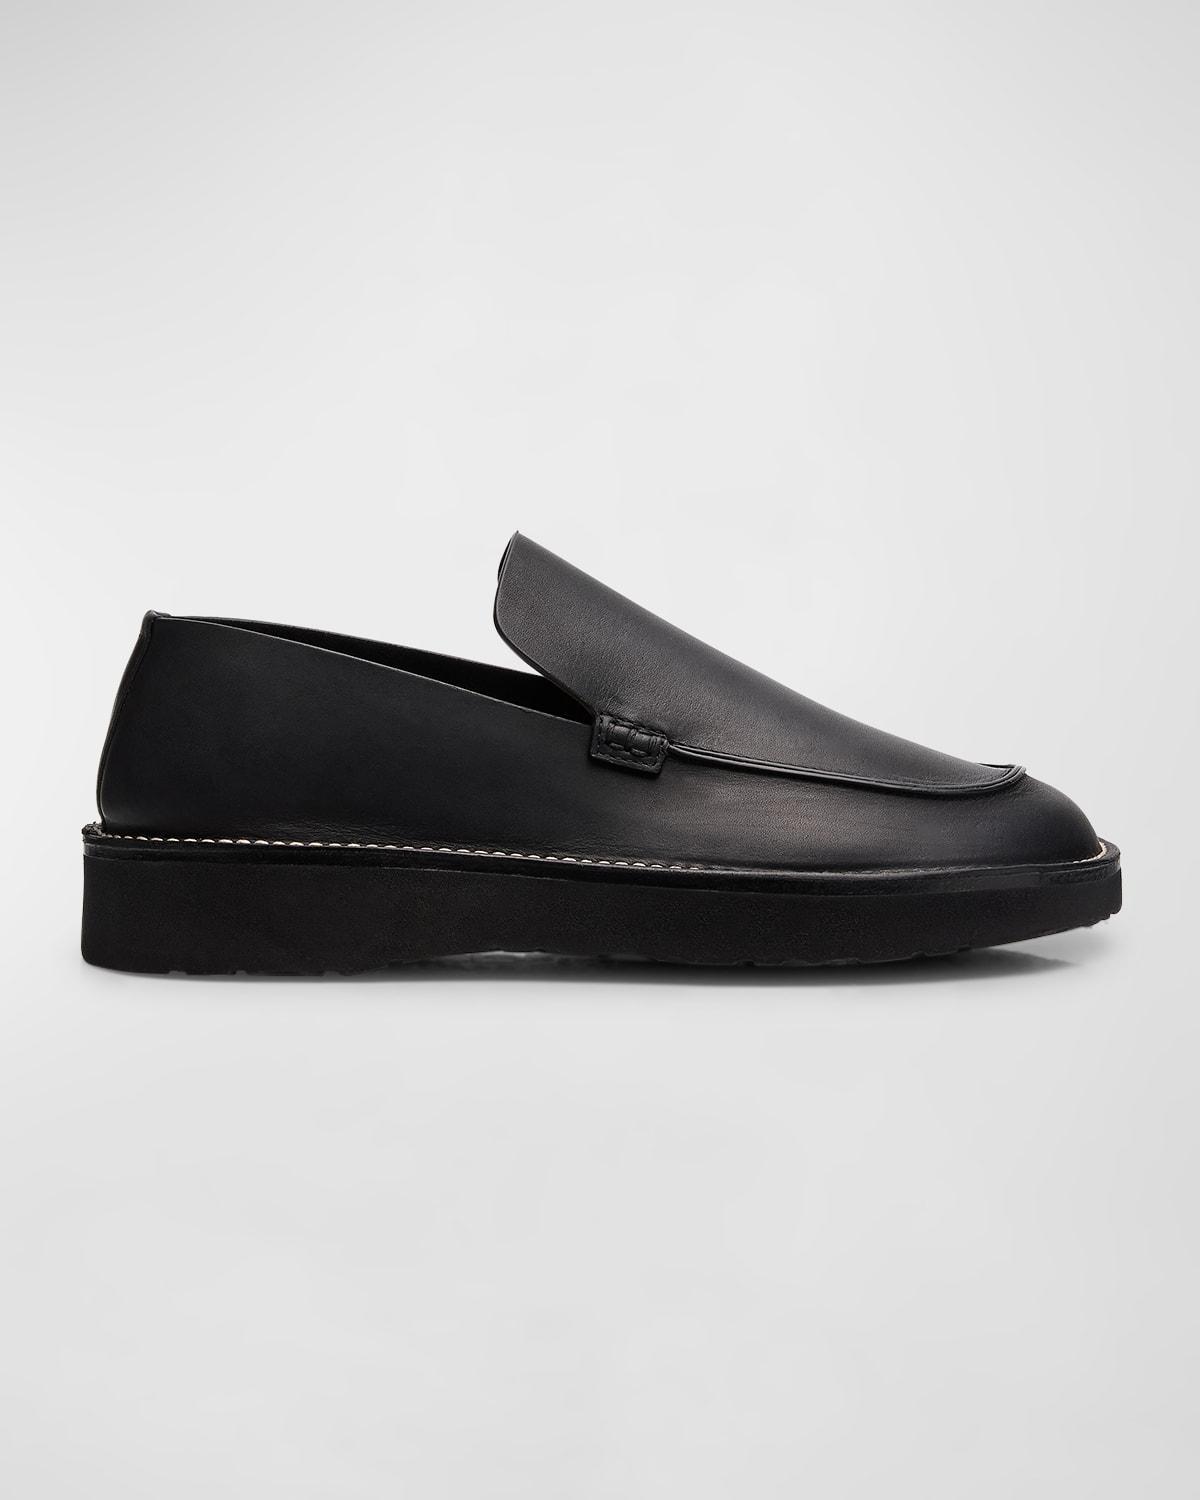 Mens Woven Leather Slippers, Black Product Image